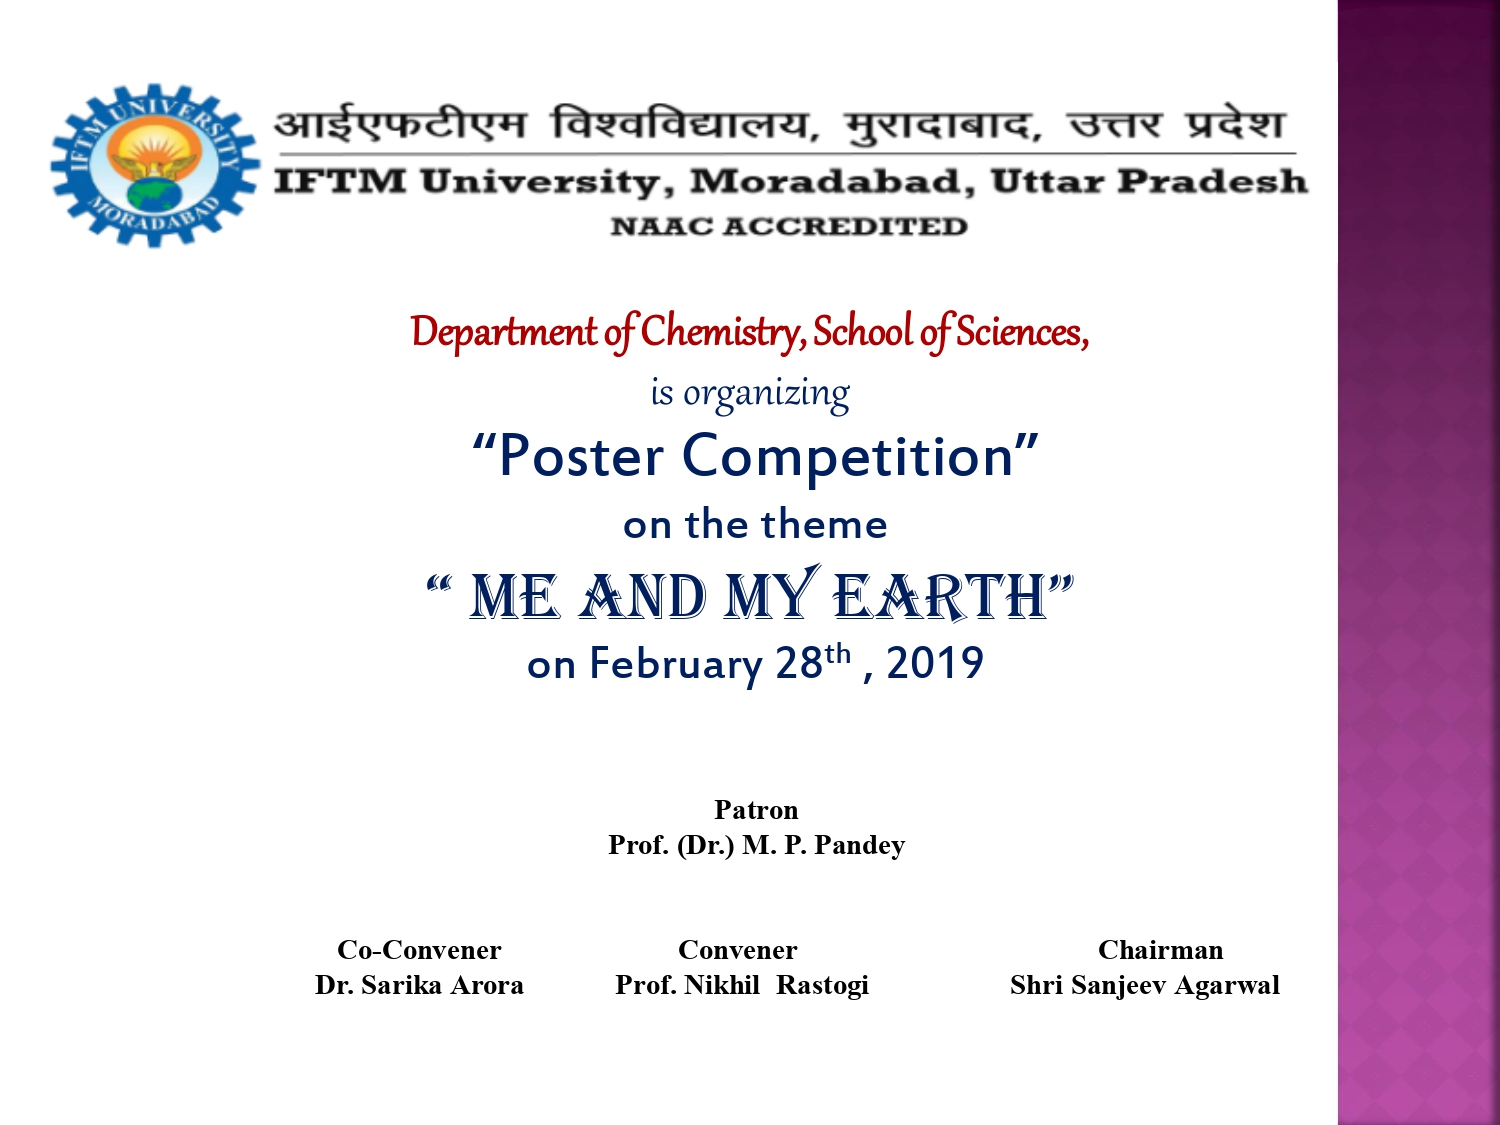  Poster Competition on the Theme: Me and My Earth